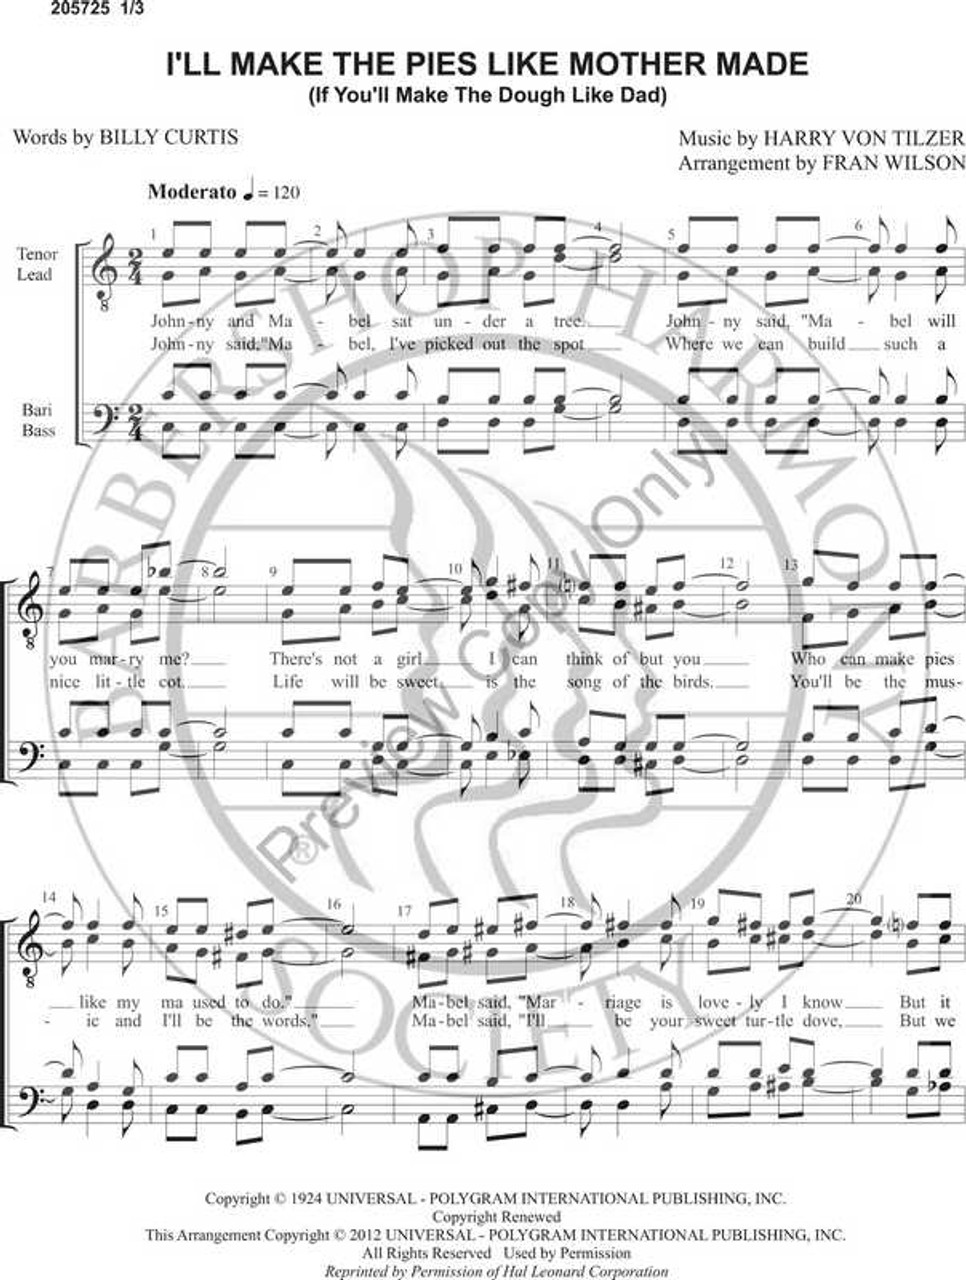 I'll Make The Pies Like Mother Made (If You'll Make The Dough Like Dad) (TTBB) (arr. Fran Wilson)-Download-UNPUB